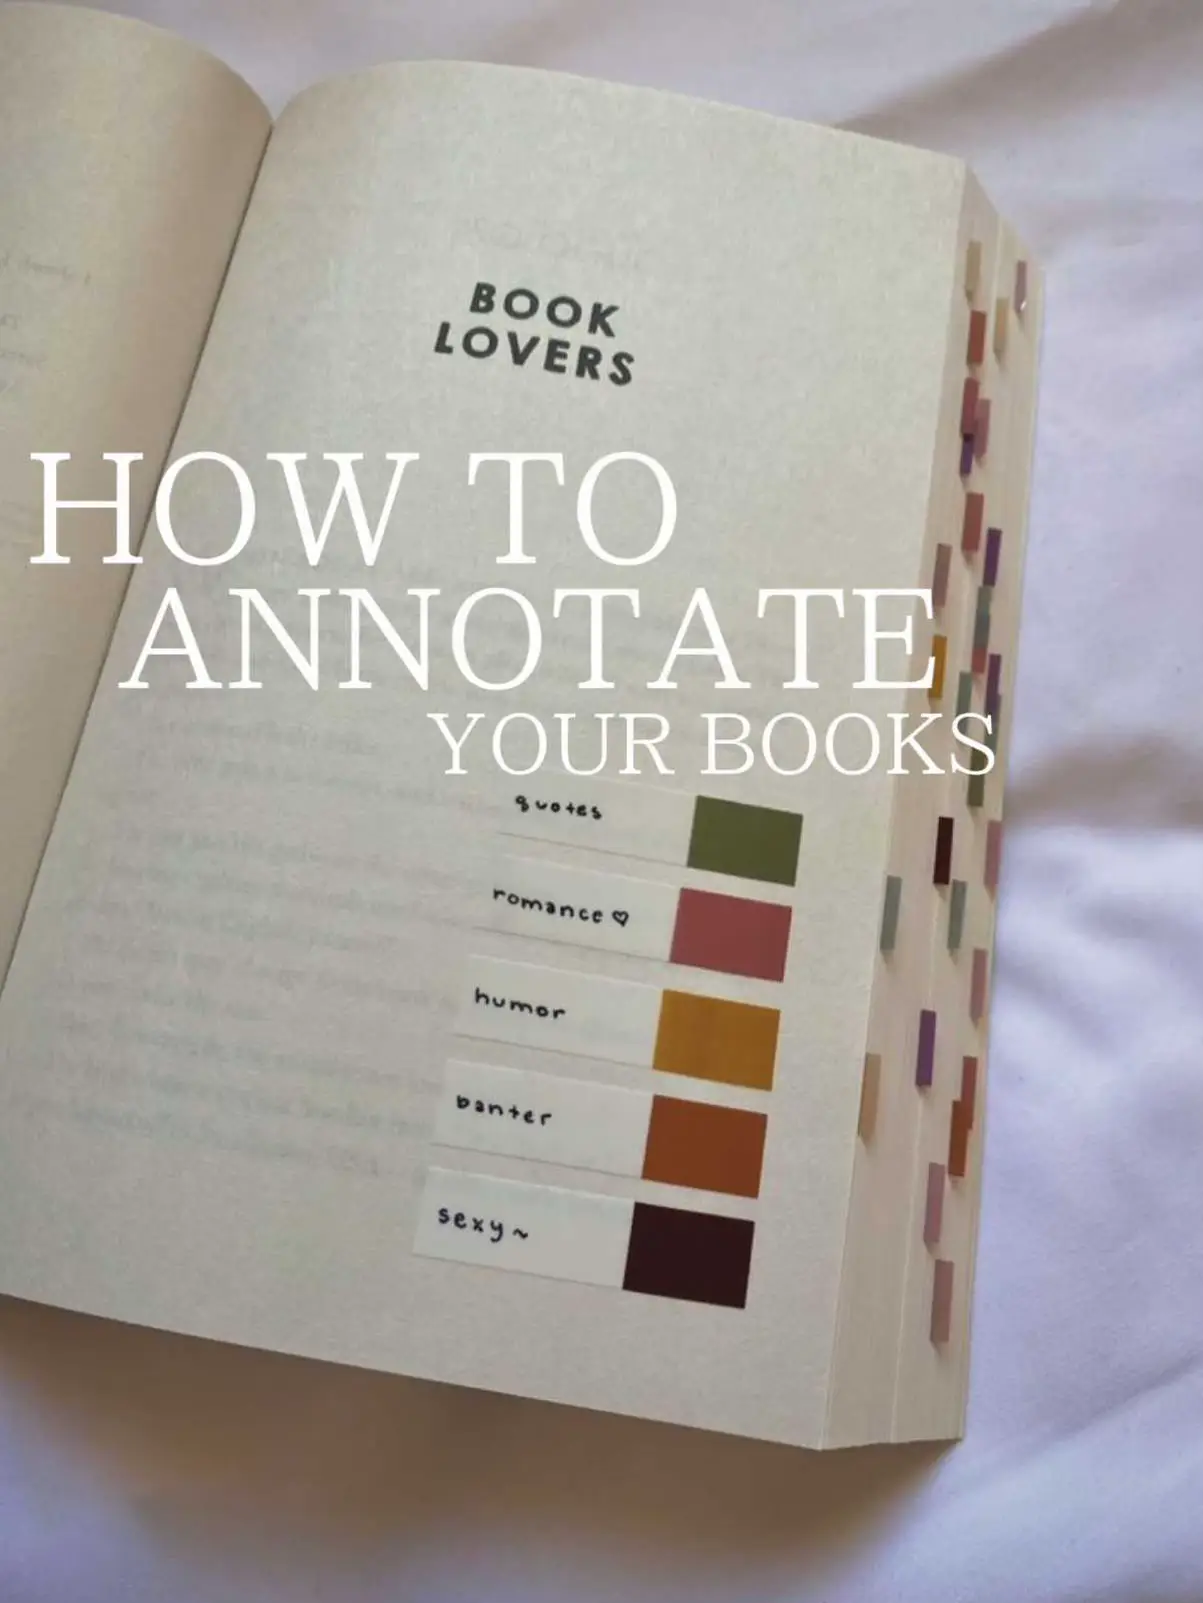 How Do You Annotate Your Books?